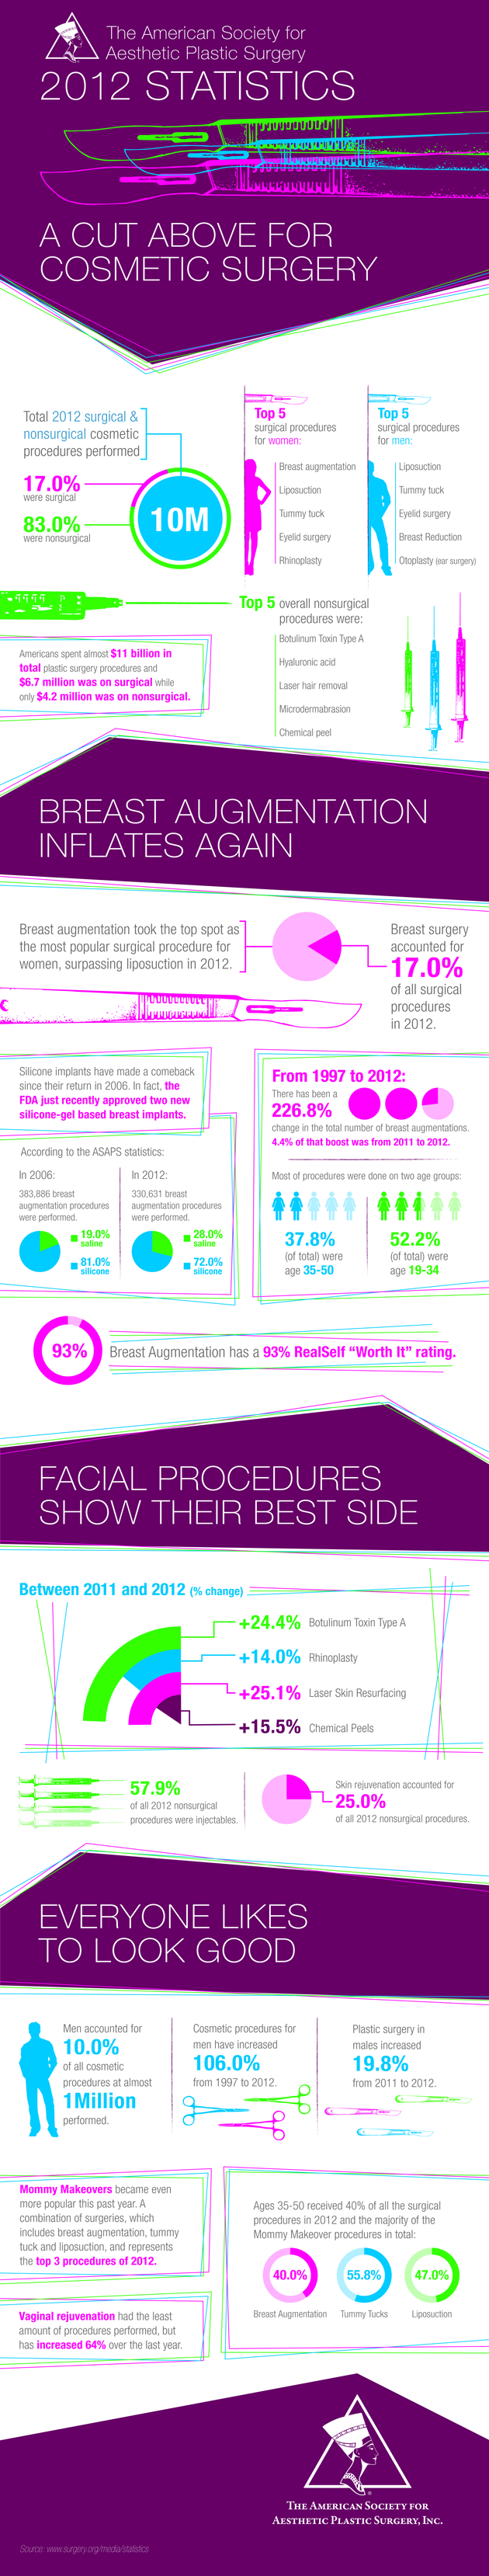 Injectables and Male Plastic Surgery Grow in Popularity in 2012